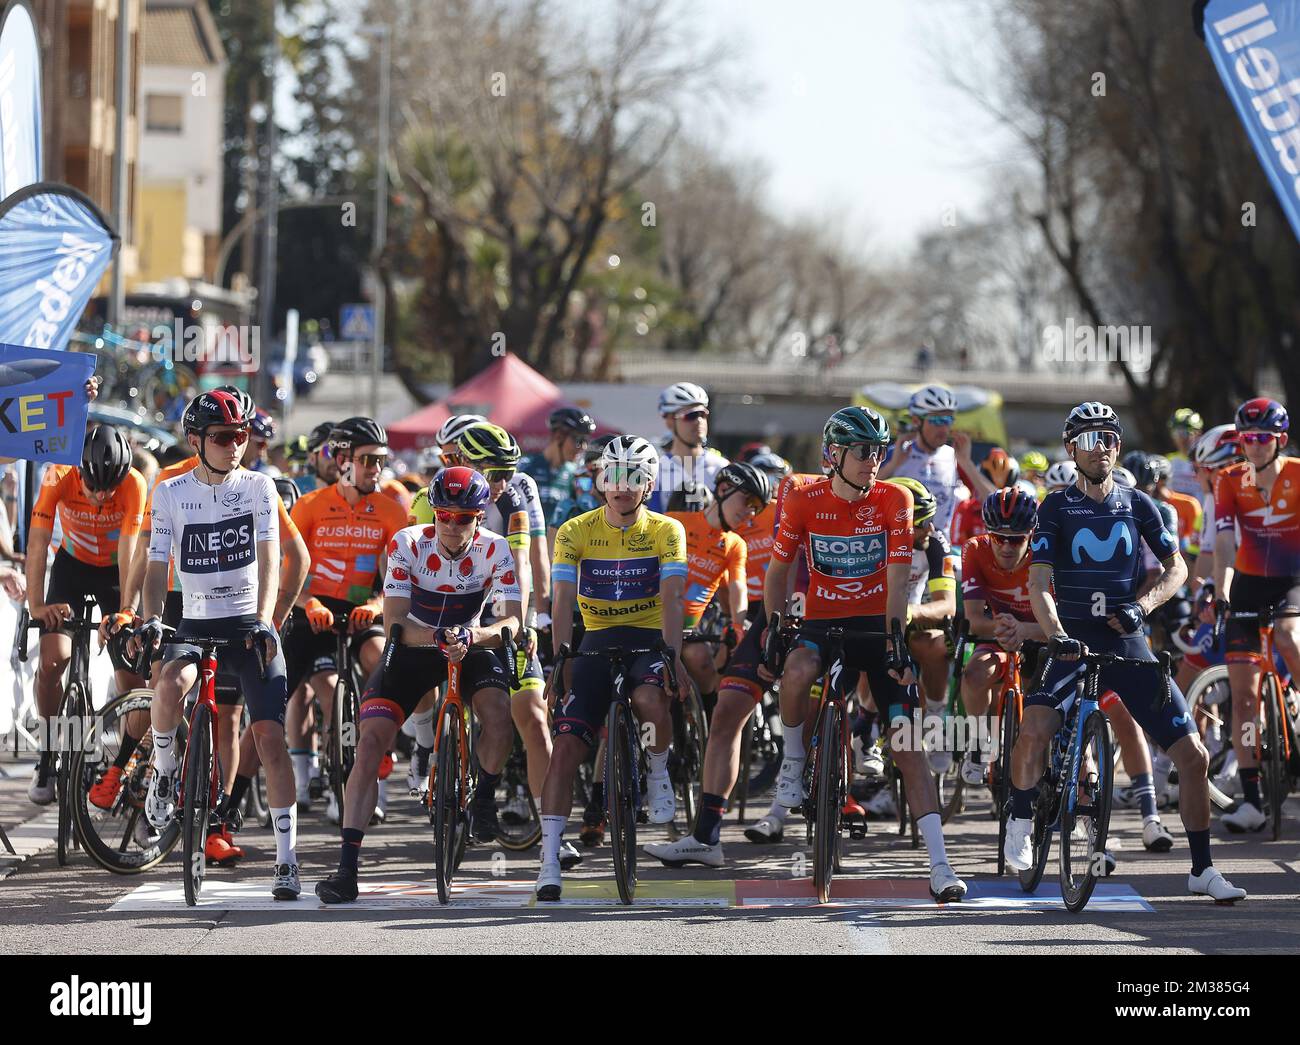 Belgian Remco Evenepoel of Quick-Step Alpha Vinyl at the start of stage two of the 'Volta a la Comunitat Valenciana' Tour of Valencia cycling race in Spain, on Thursday 03 February 2022 from Betera to Torrent (172,1km). The Tour is taking place from February 2nd to the 6th. BELGA PHOTO JUAN CARLOS CARDENAS  Stock Photo